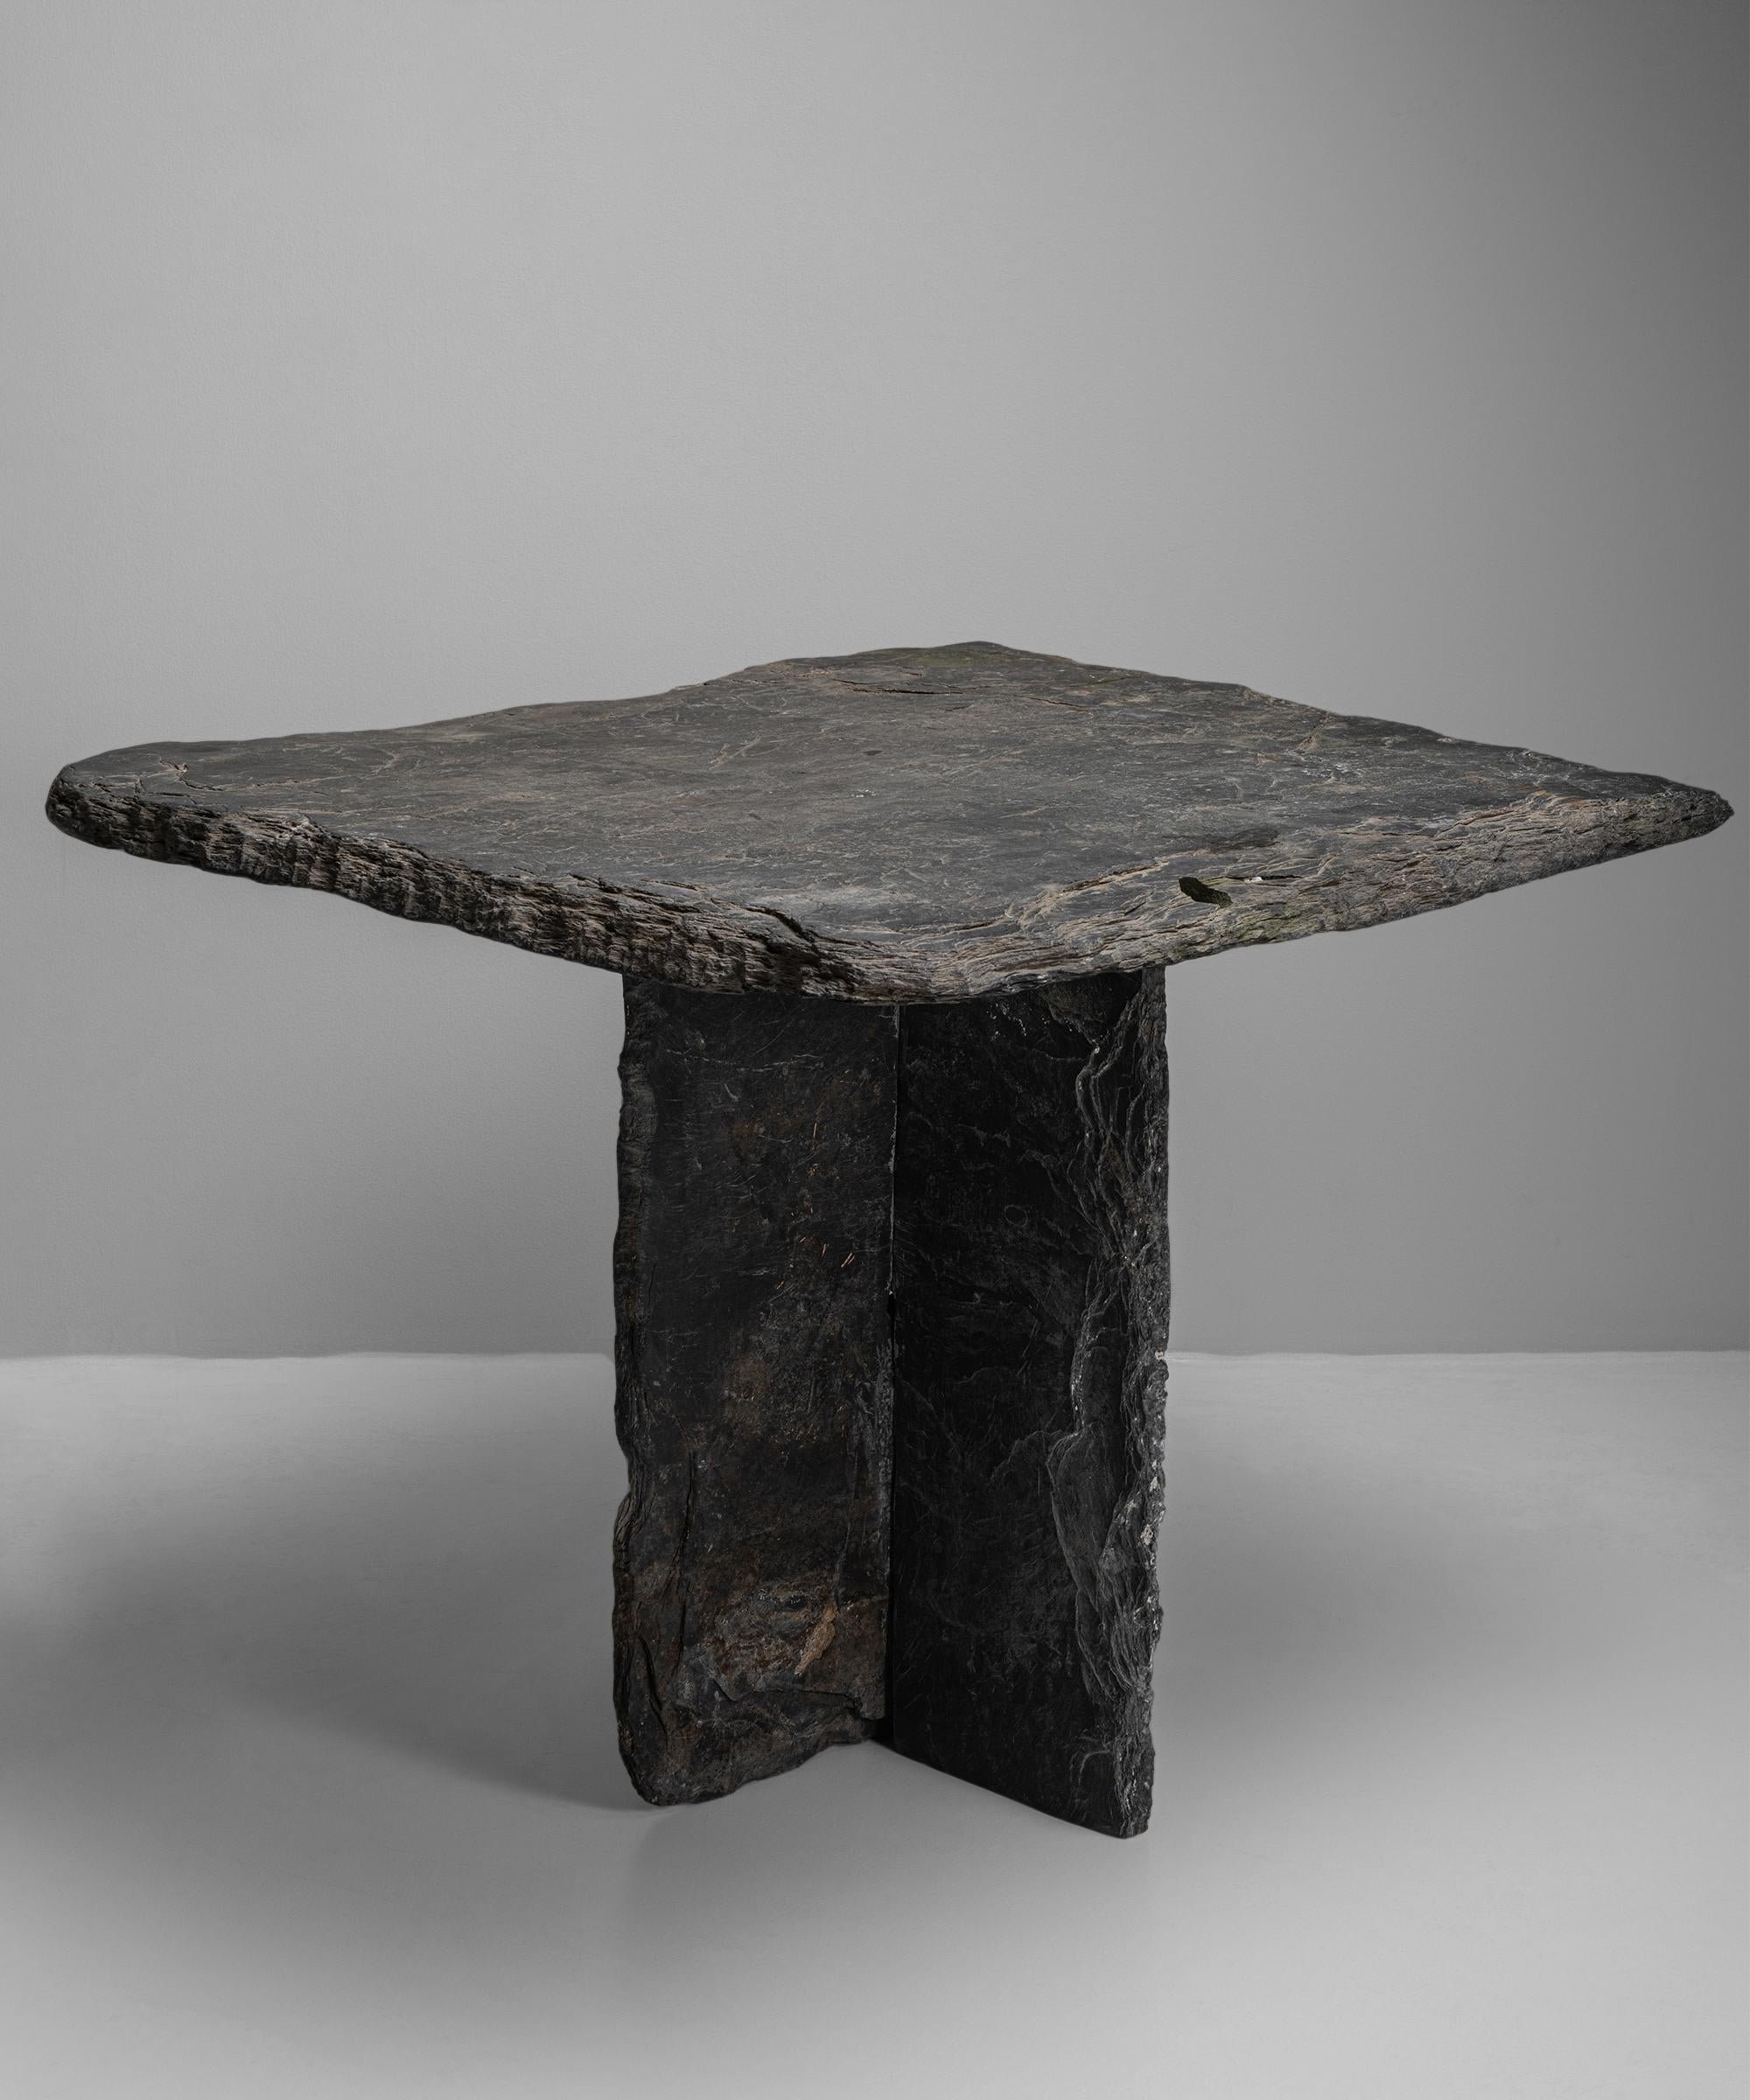 Primitive slate table

France circa 1920

Primitive slate table with heavy slab top and interlocking base.

Measures: 33.5” W x 37.25” D x 29” H.

 

  